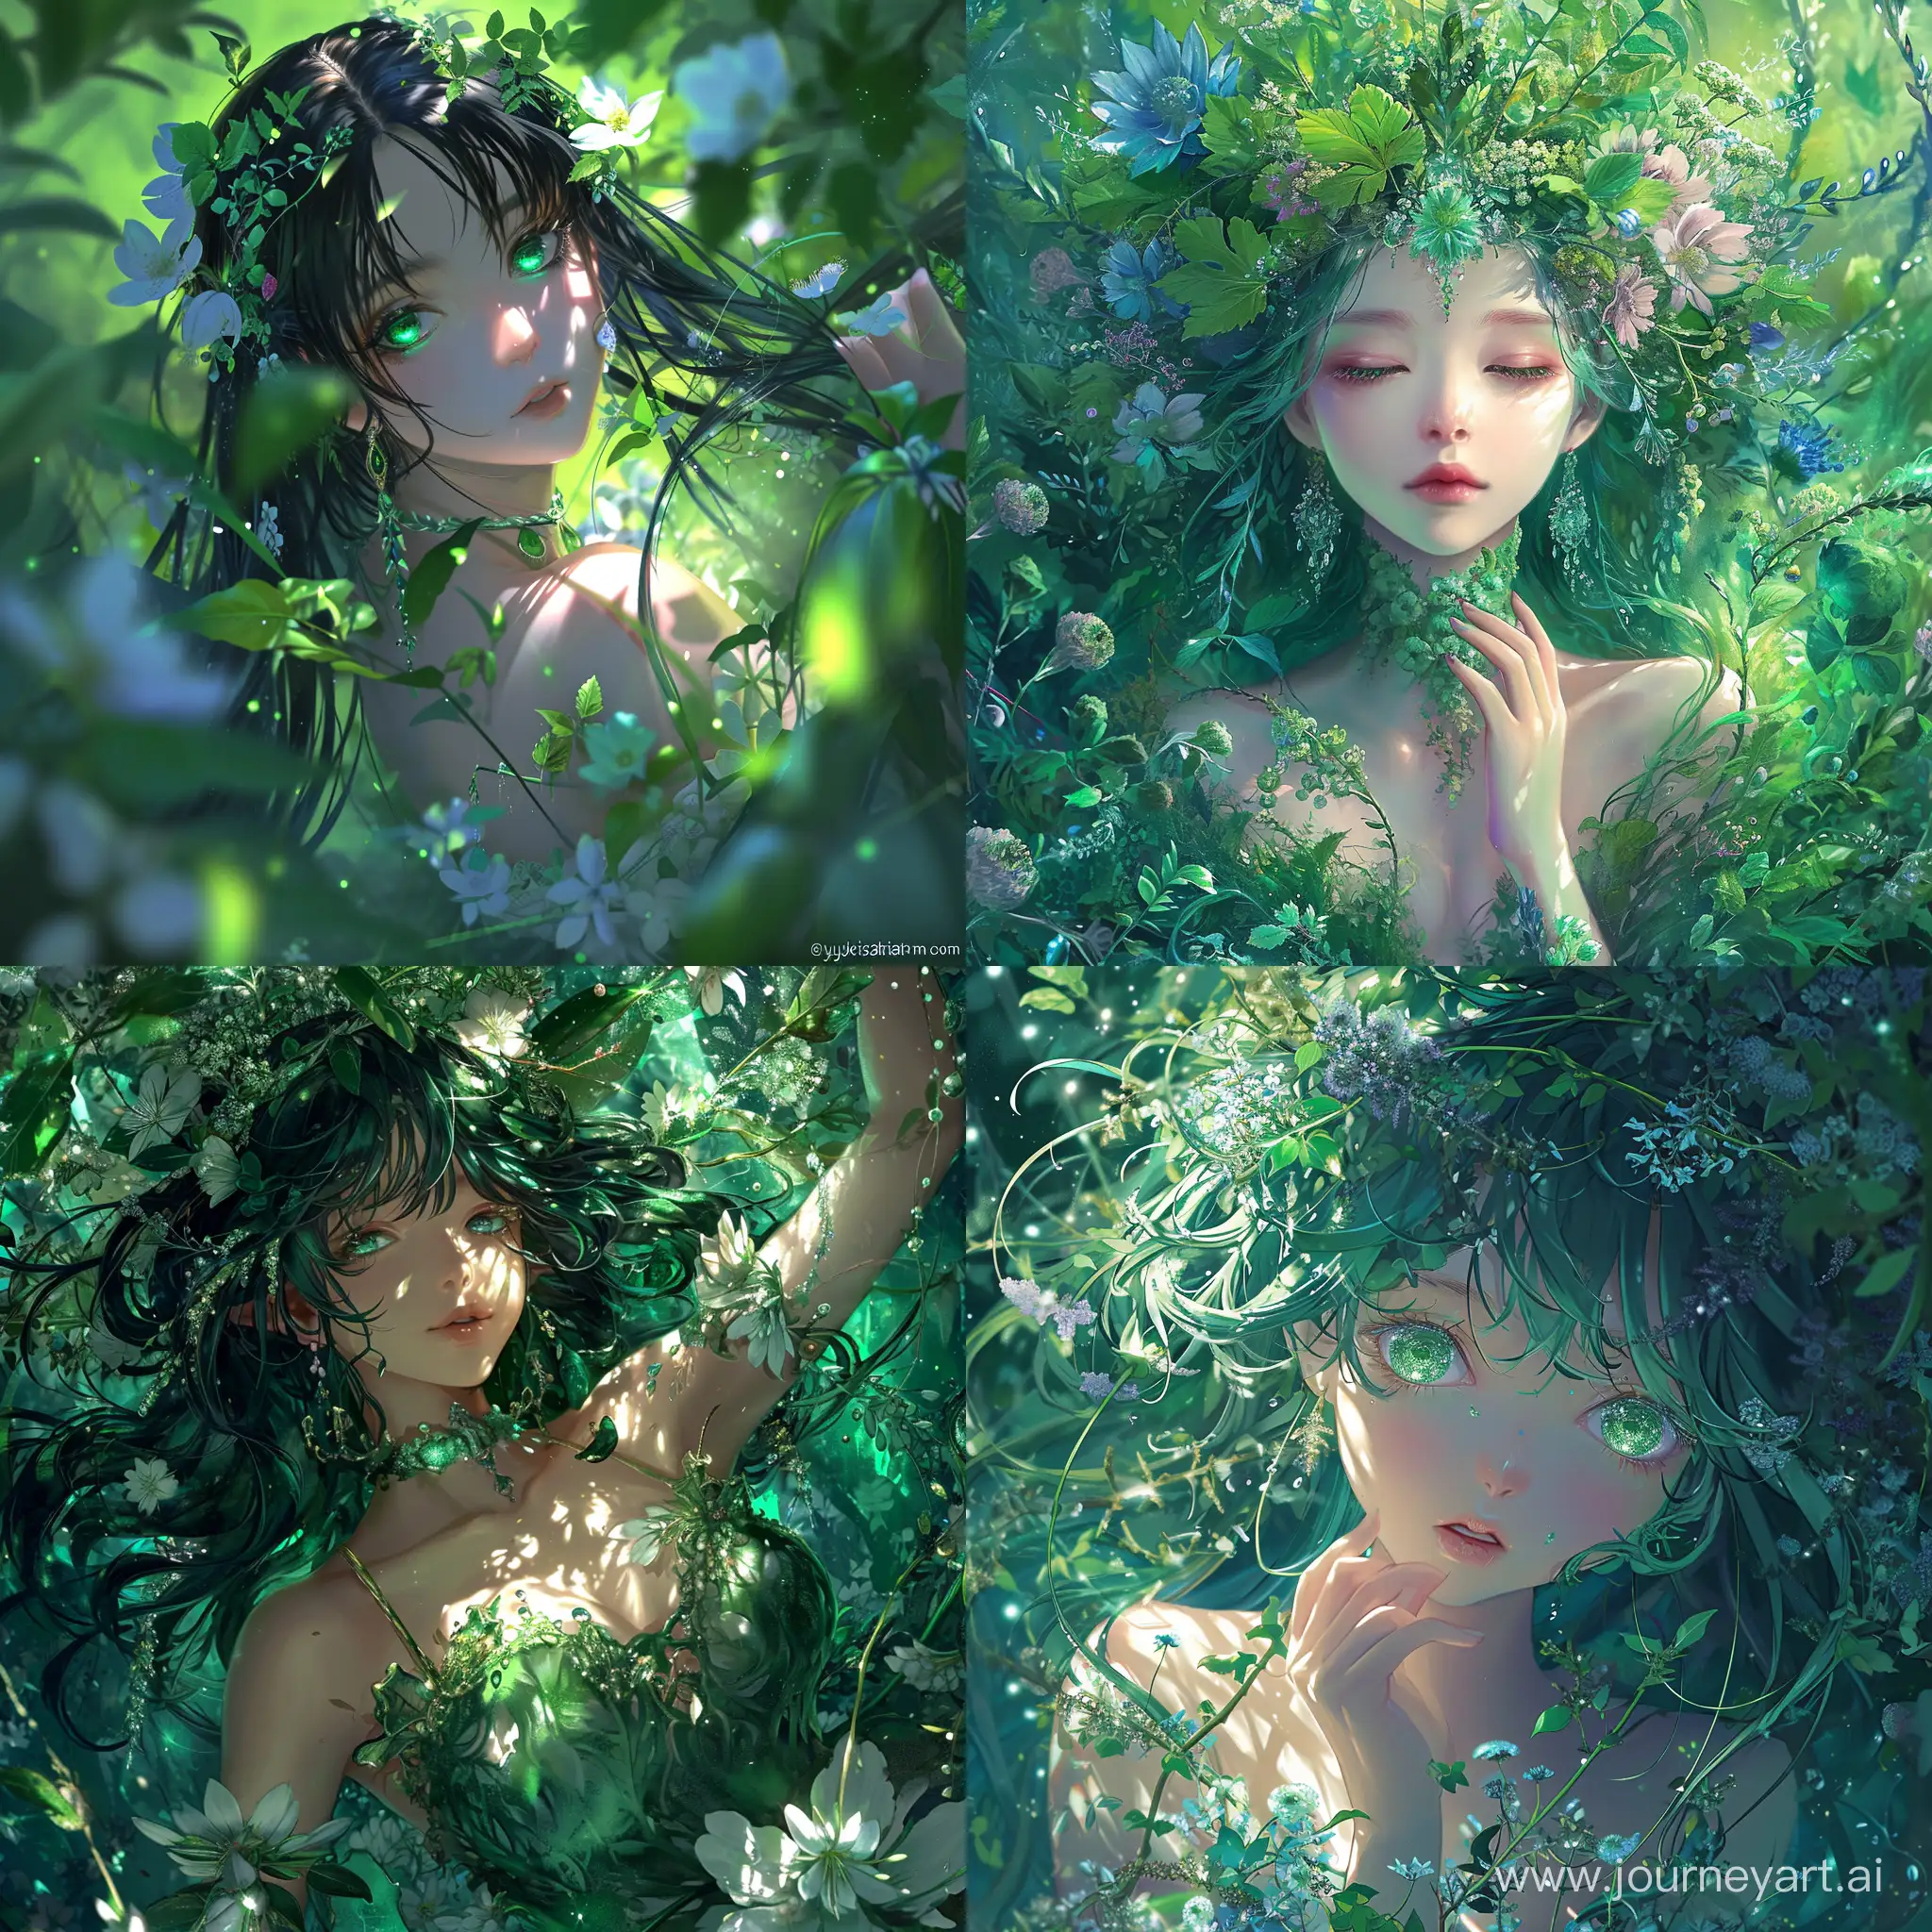 парфуми, лікарські трави, the color of the deepest forest emeralds, sparkle with a hint of magic and mystery, reflecting the beauty of the floral symphony that surrounds her, With the clarity and detail of 8K Ultra HD images, every petal, every hue, and every expression of her otherworldly charm come to life in vivid splendor, by yukisakura, awesome full color